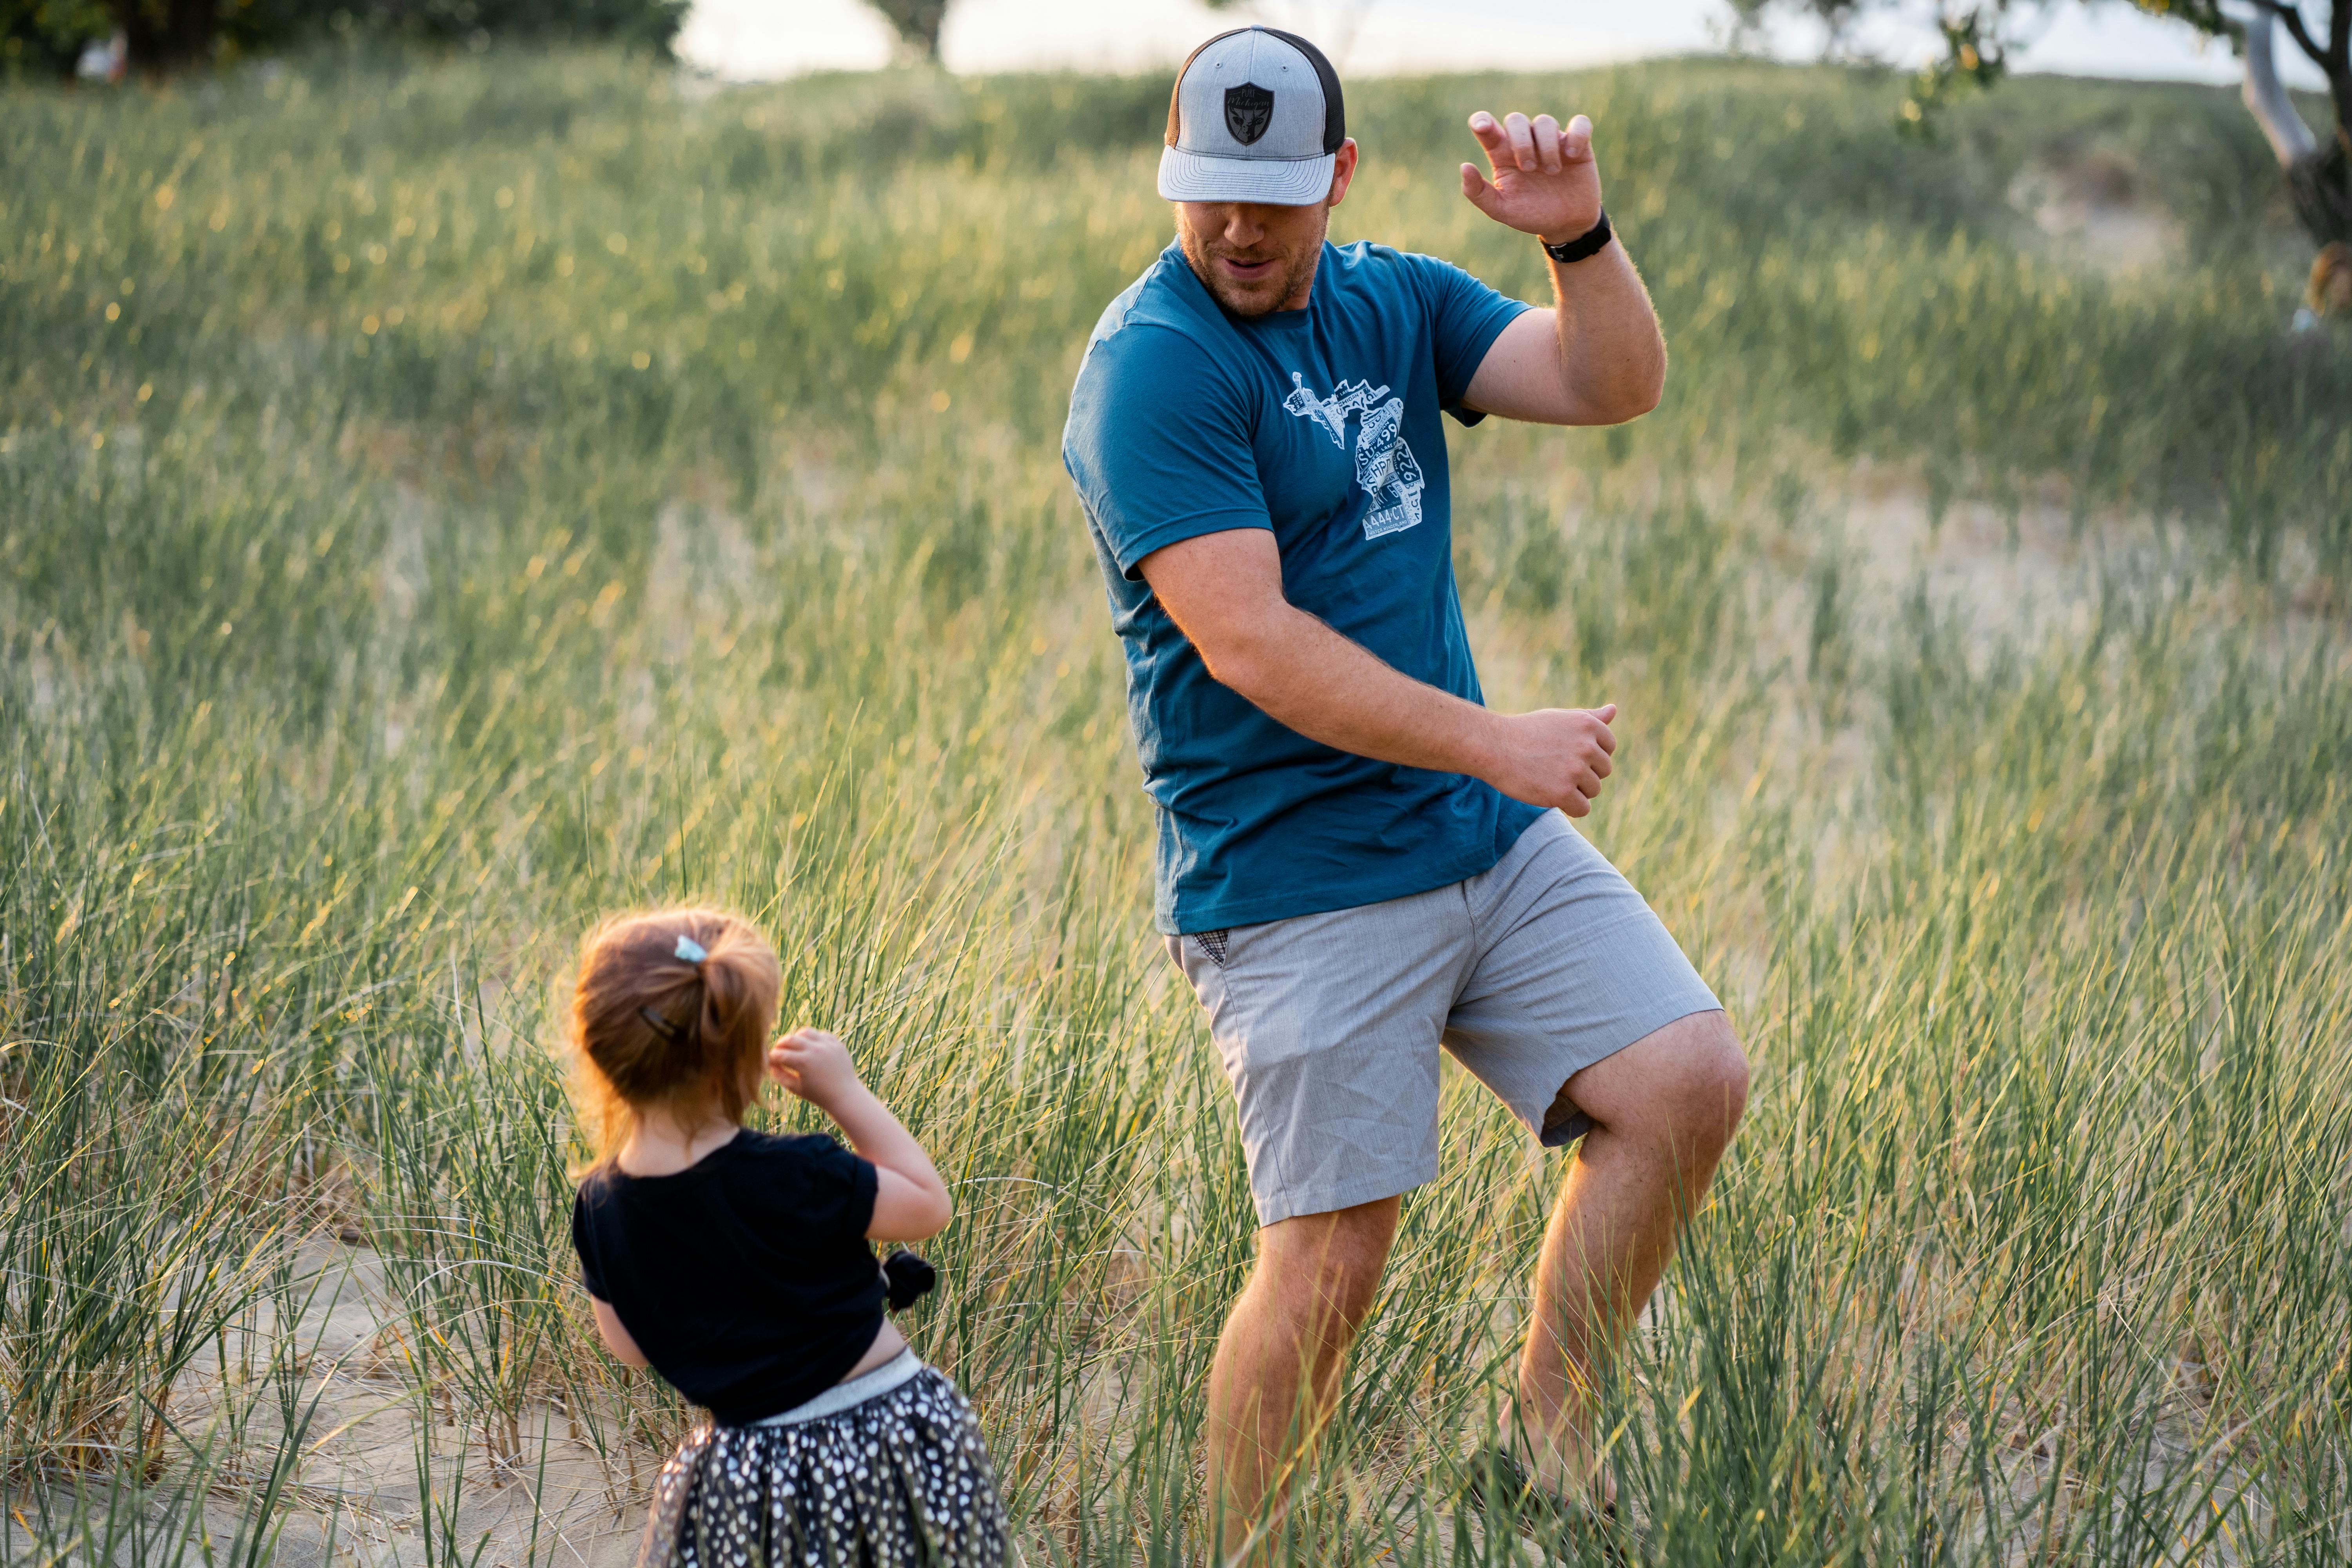 dad and daugher playing together outside in long grass